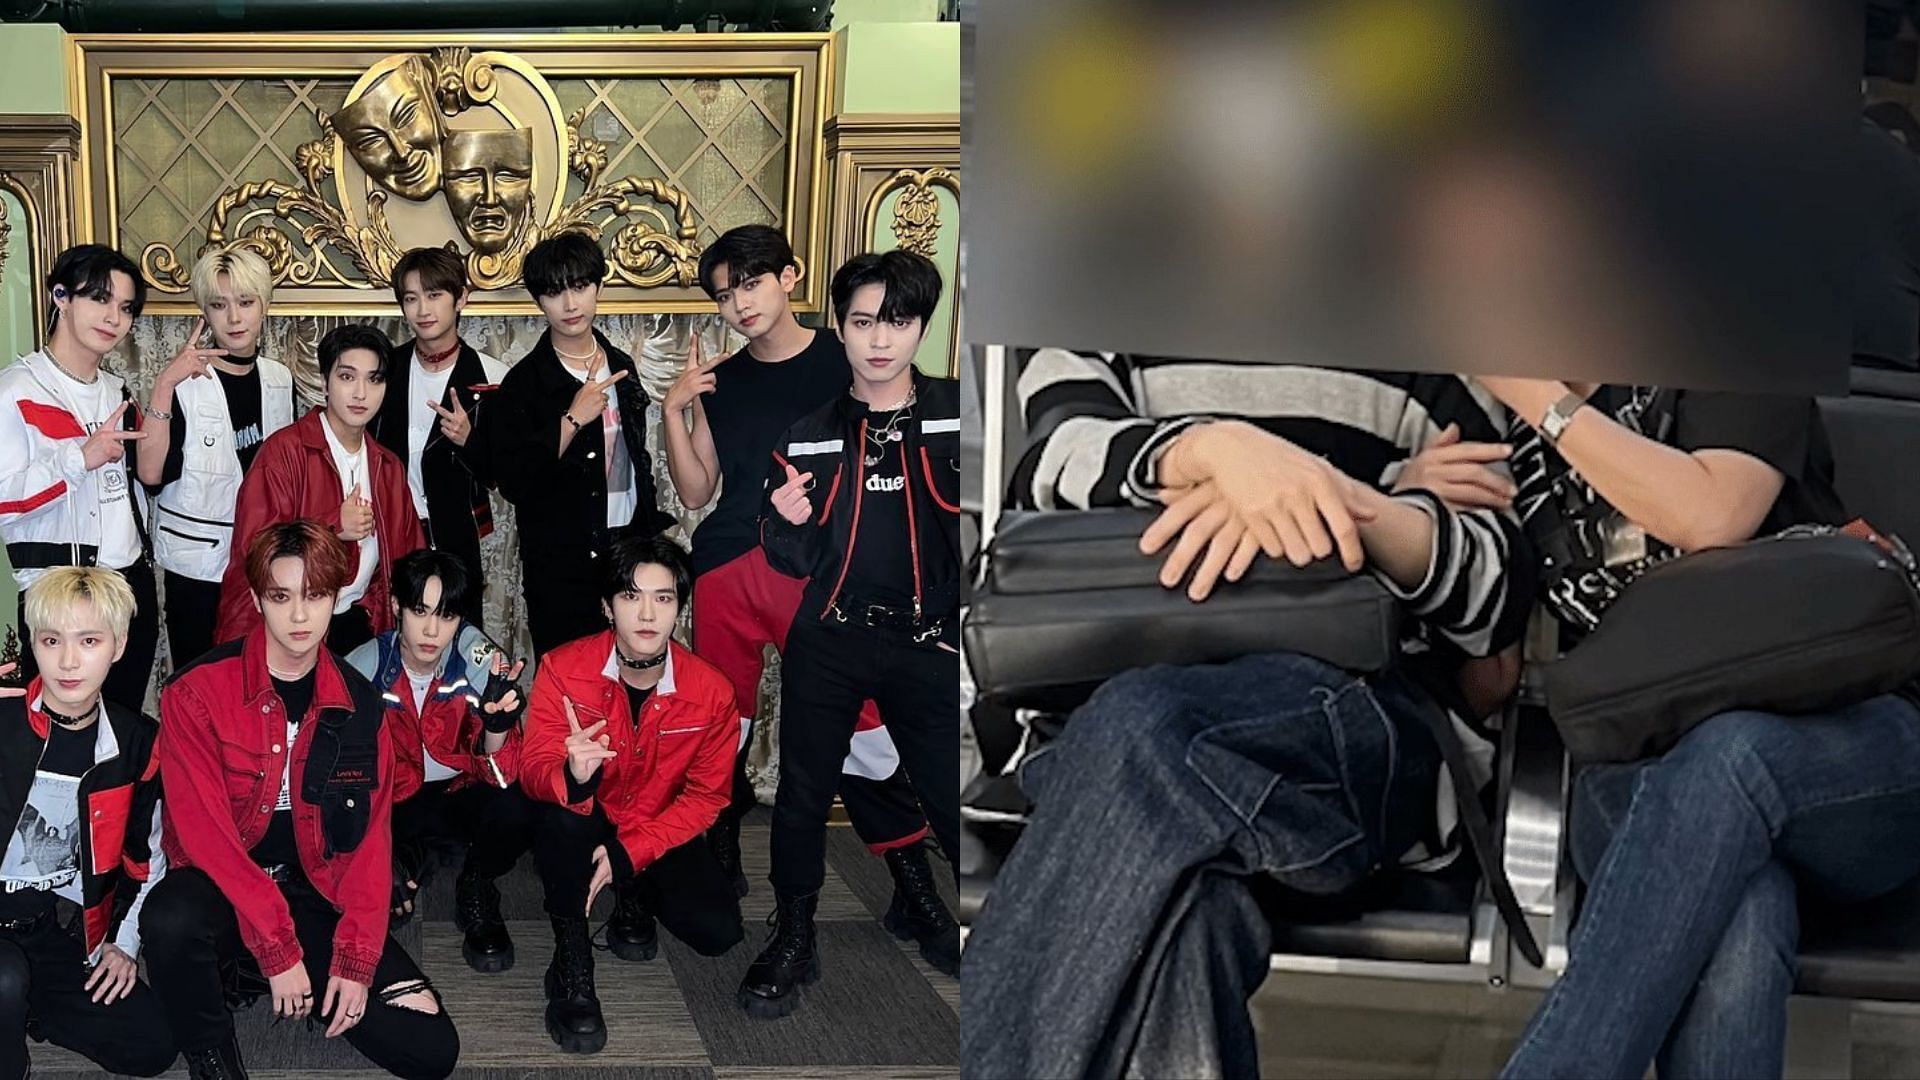 OMEGA X brings to light their struggles with sexual harassment at Spire Entertainment (Images via Instagram/omegax_official and YouTube/SBS)